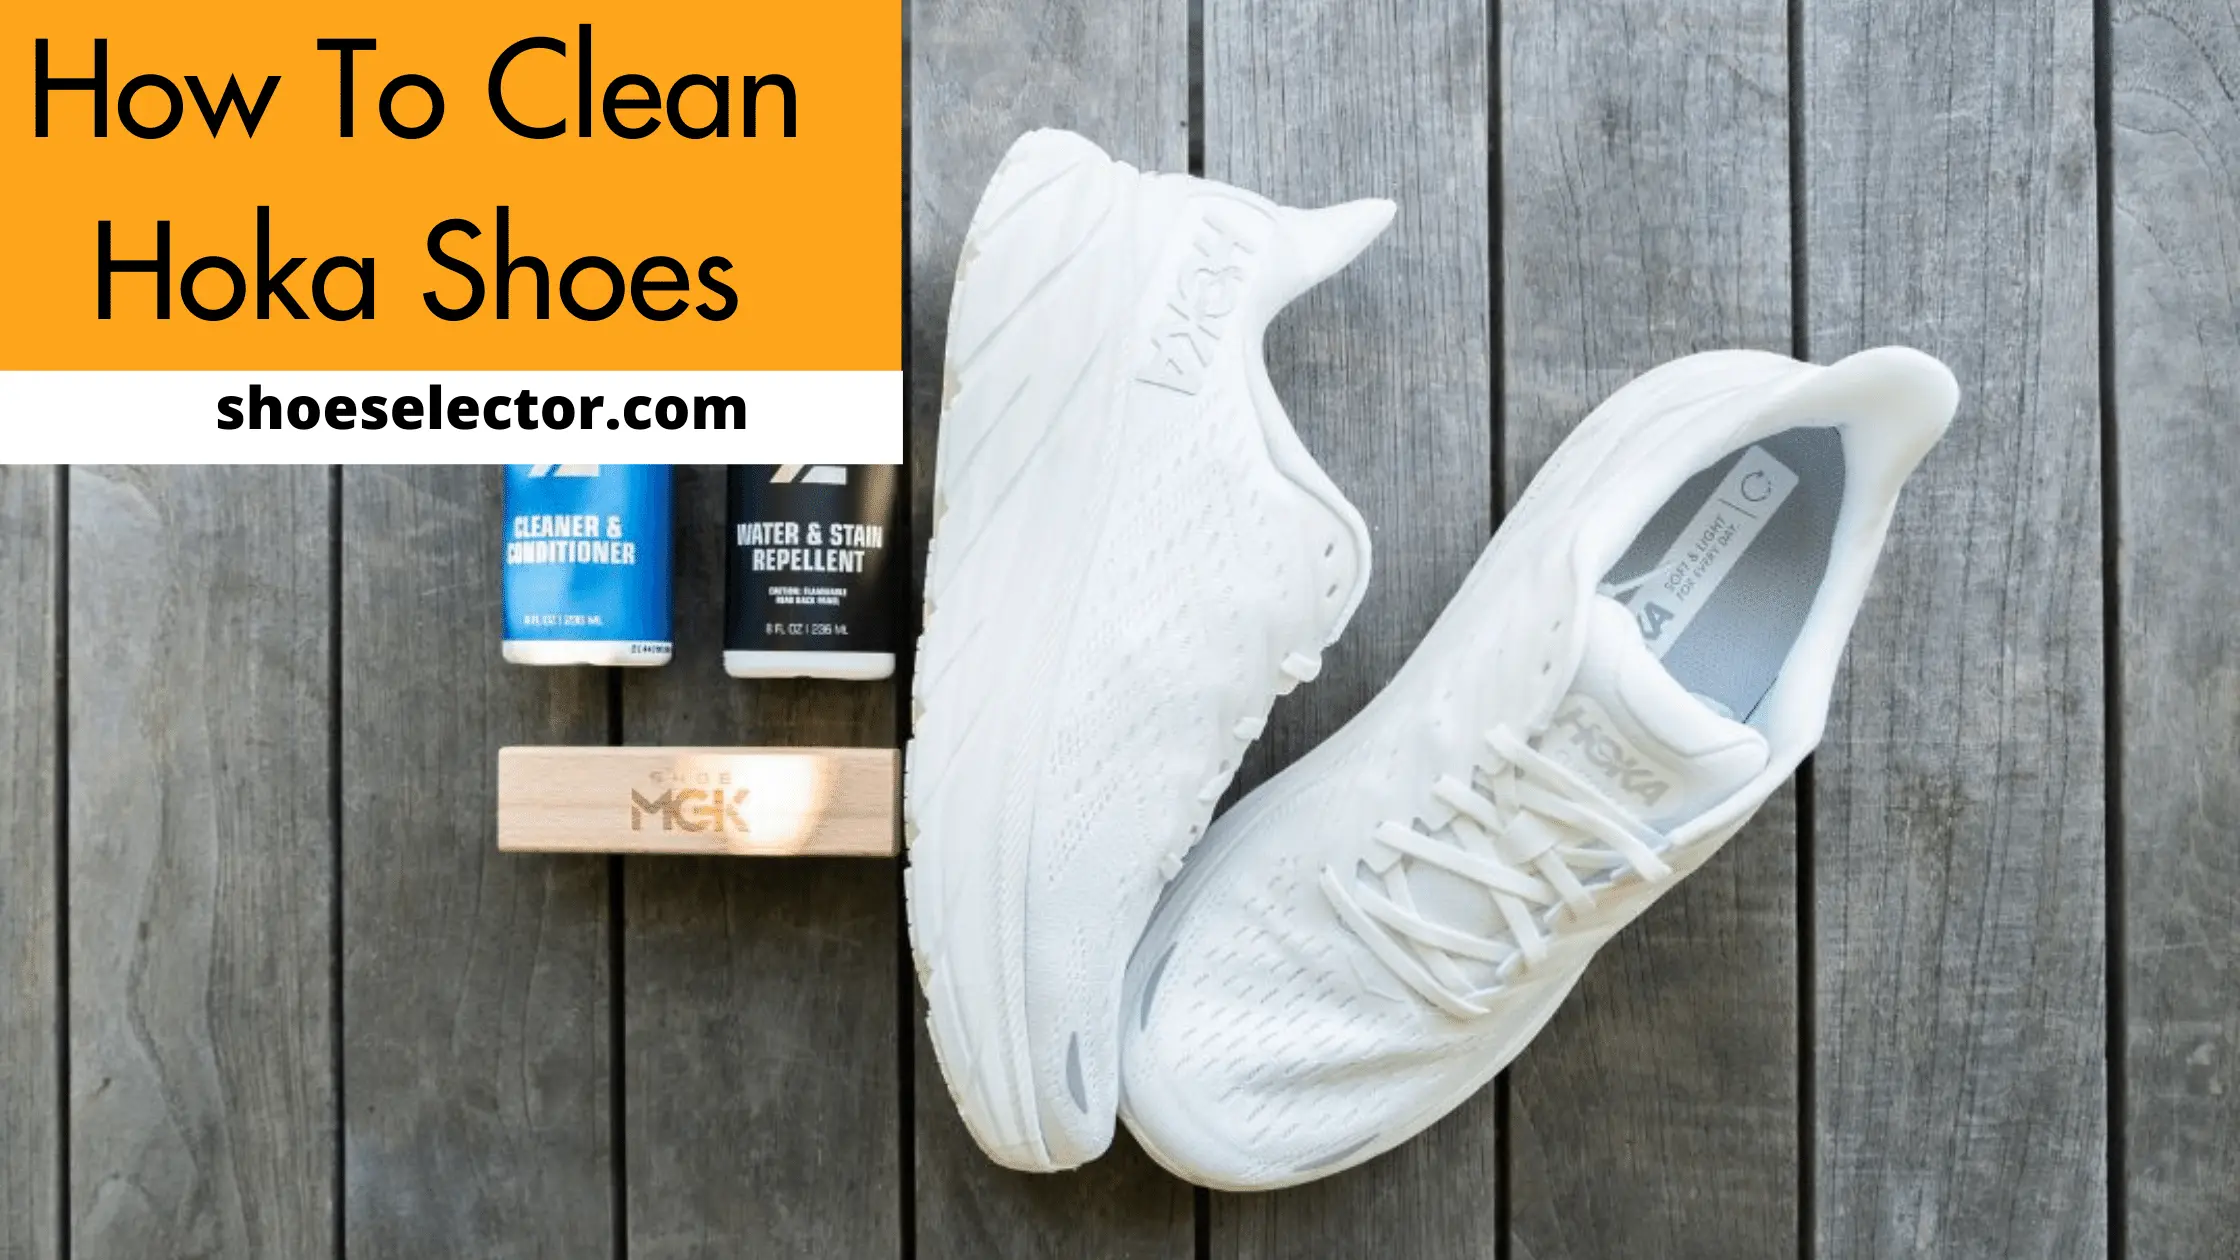 How To Clean Hoka Shoes? - Solution Guide